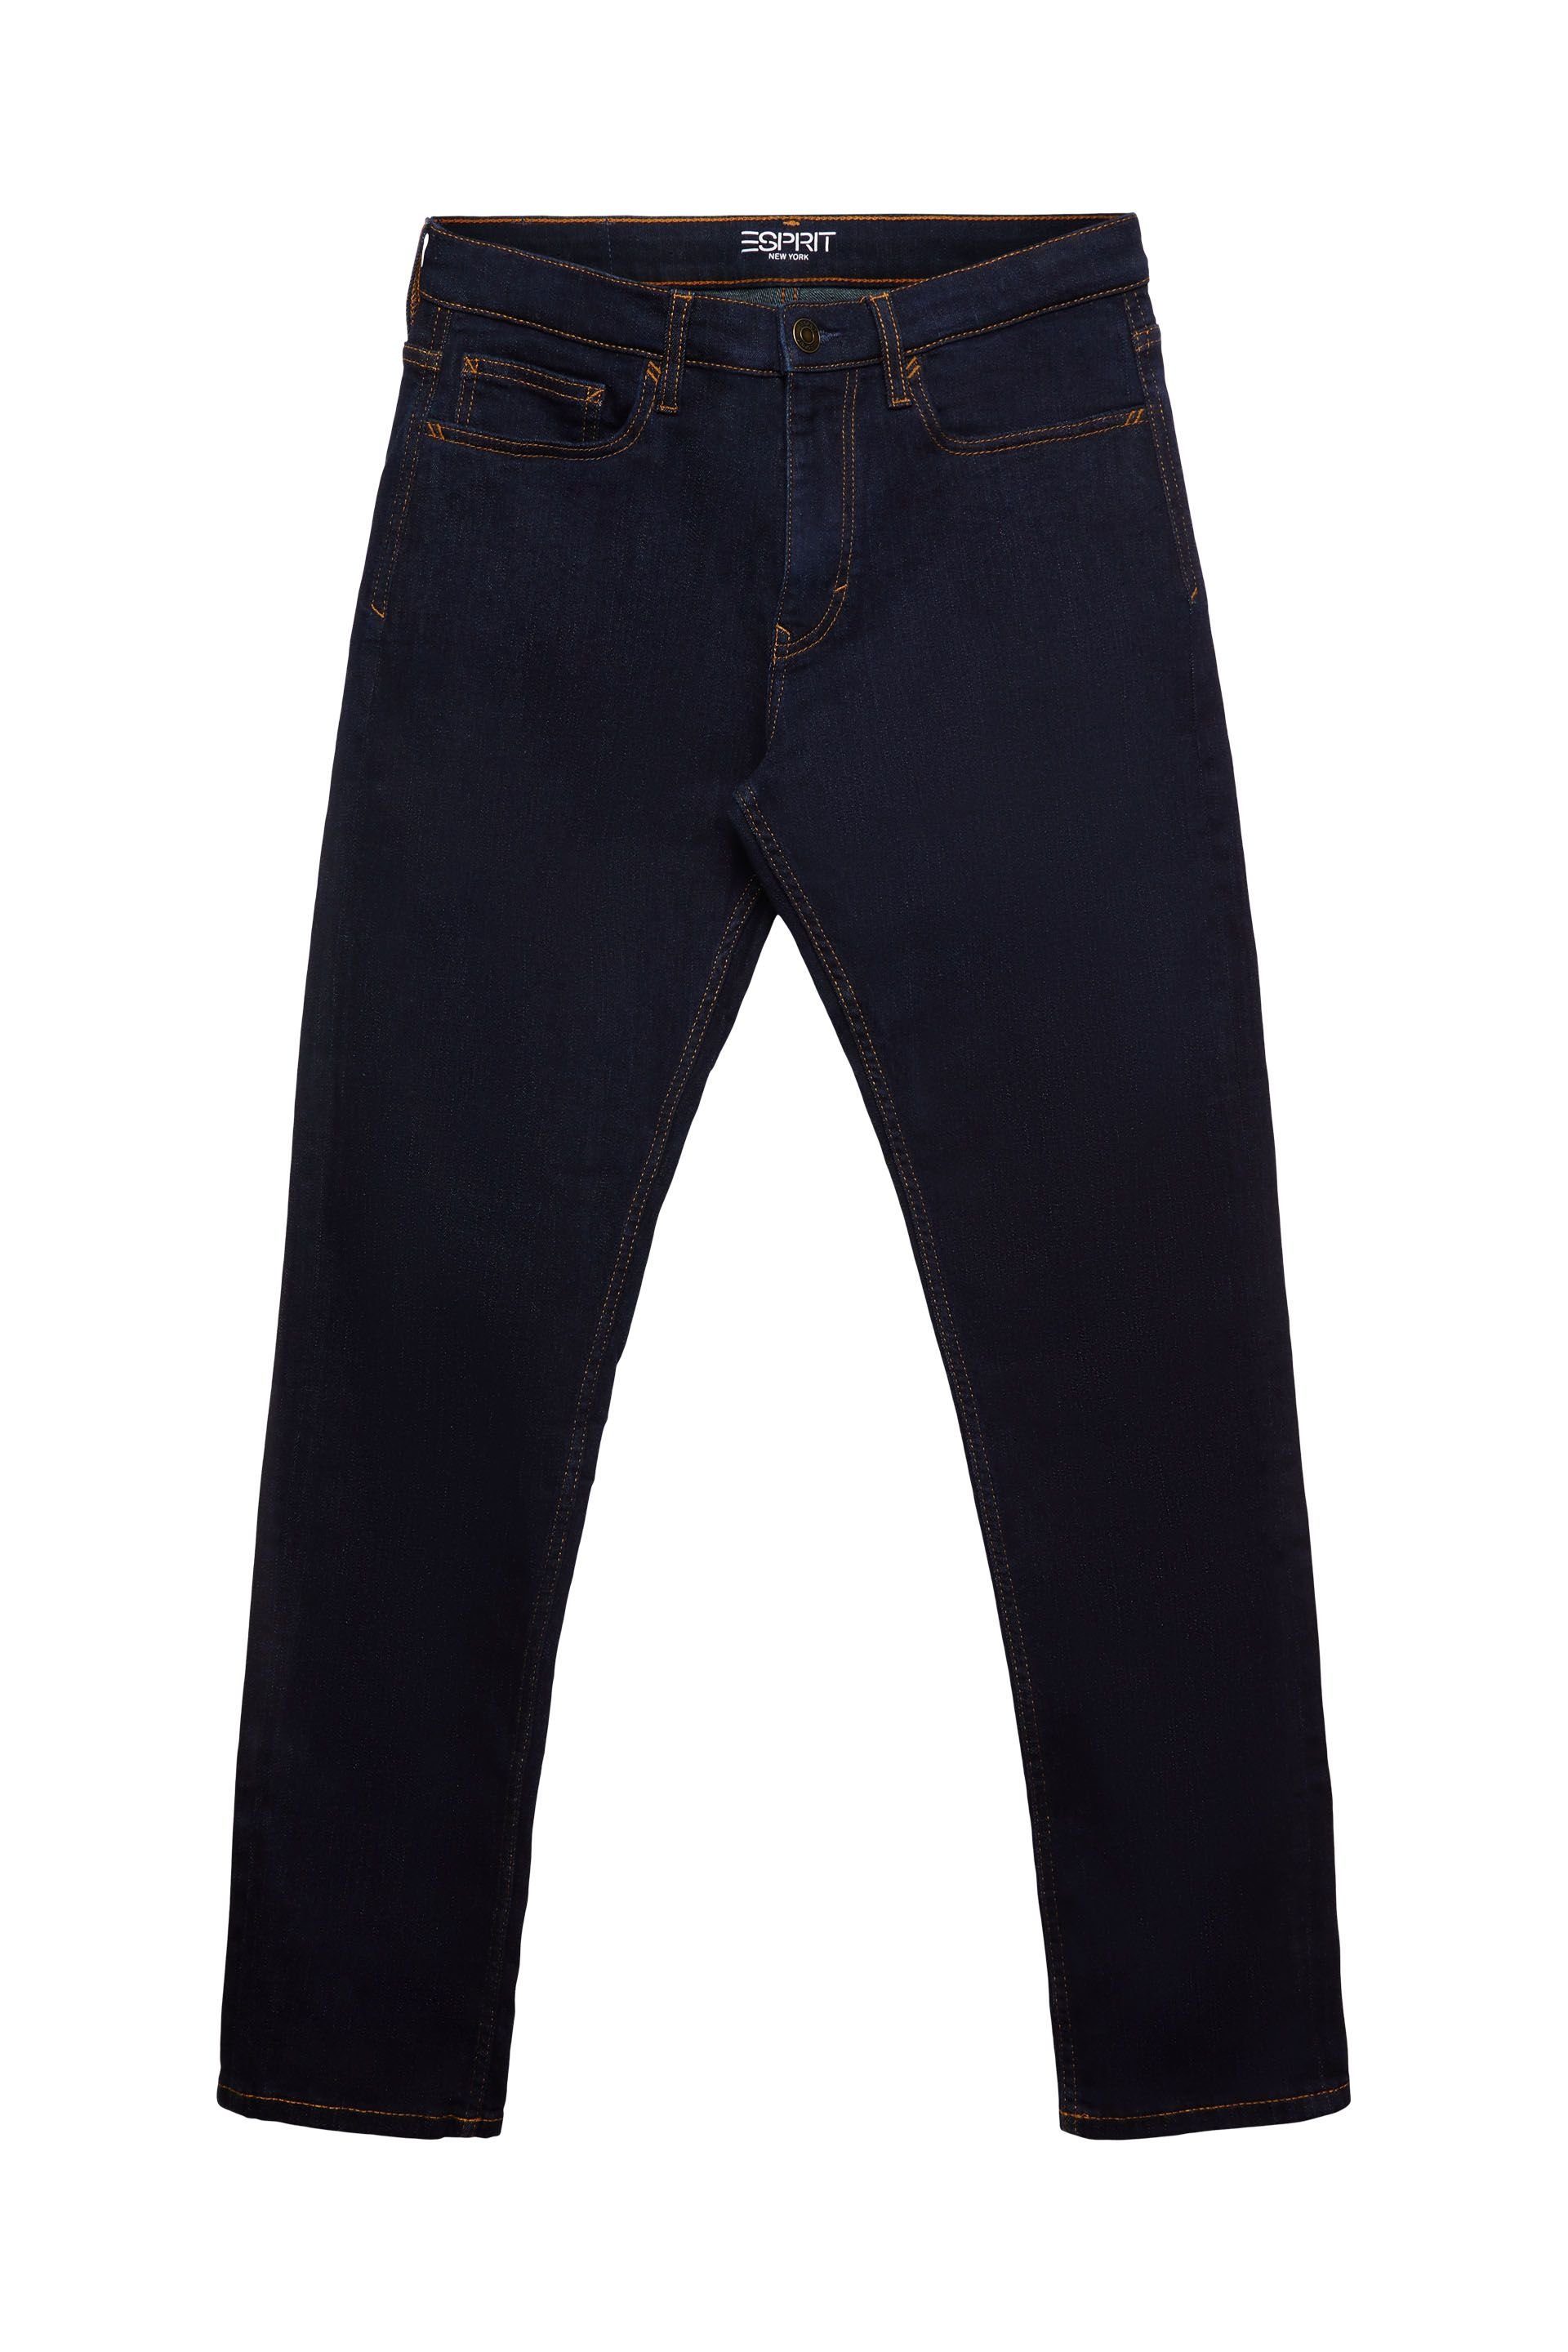 Esprit Straight-Jeans | Straight-Fit Jeans